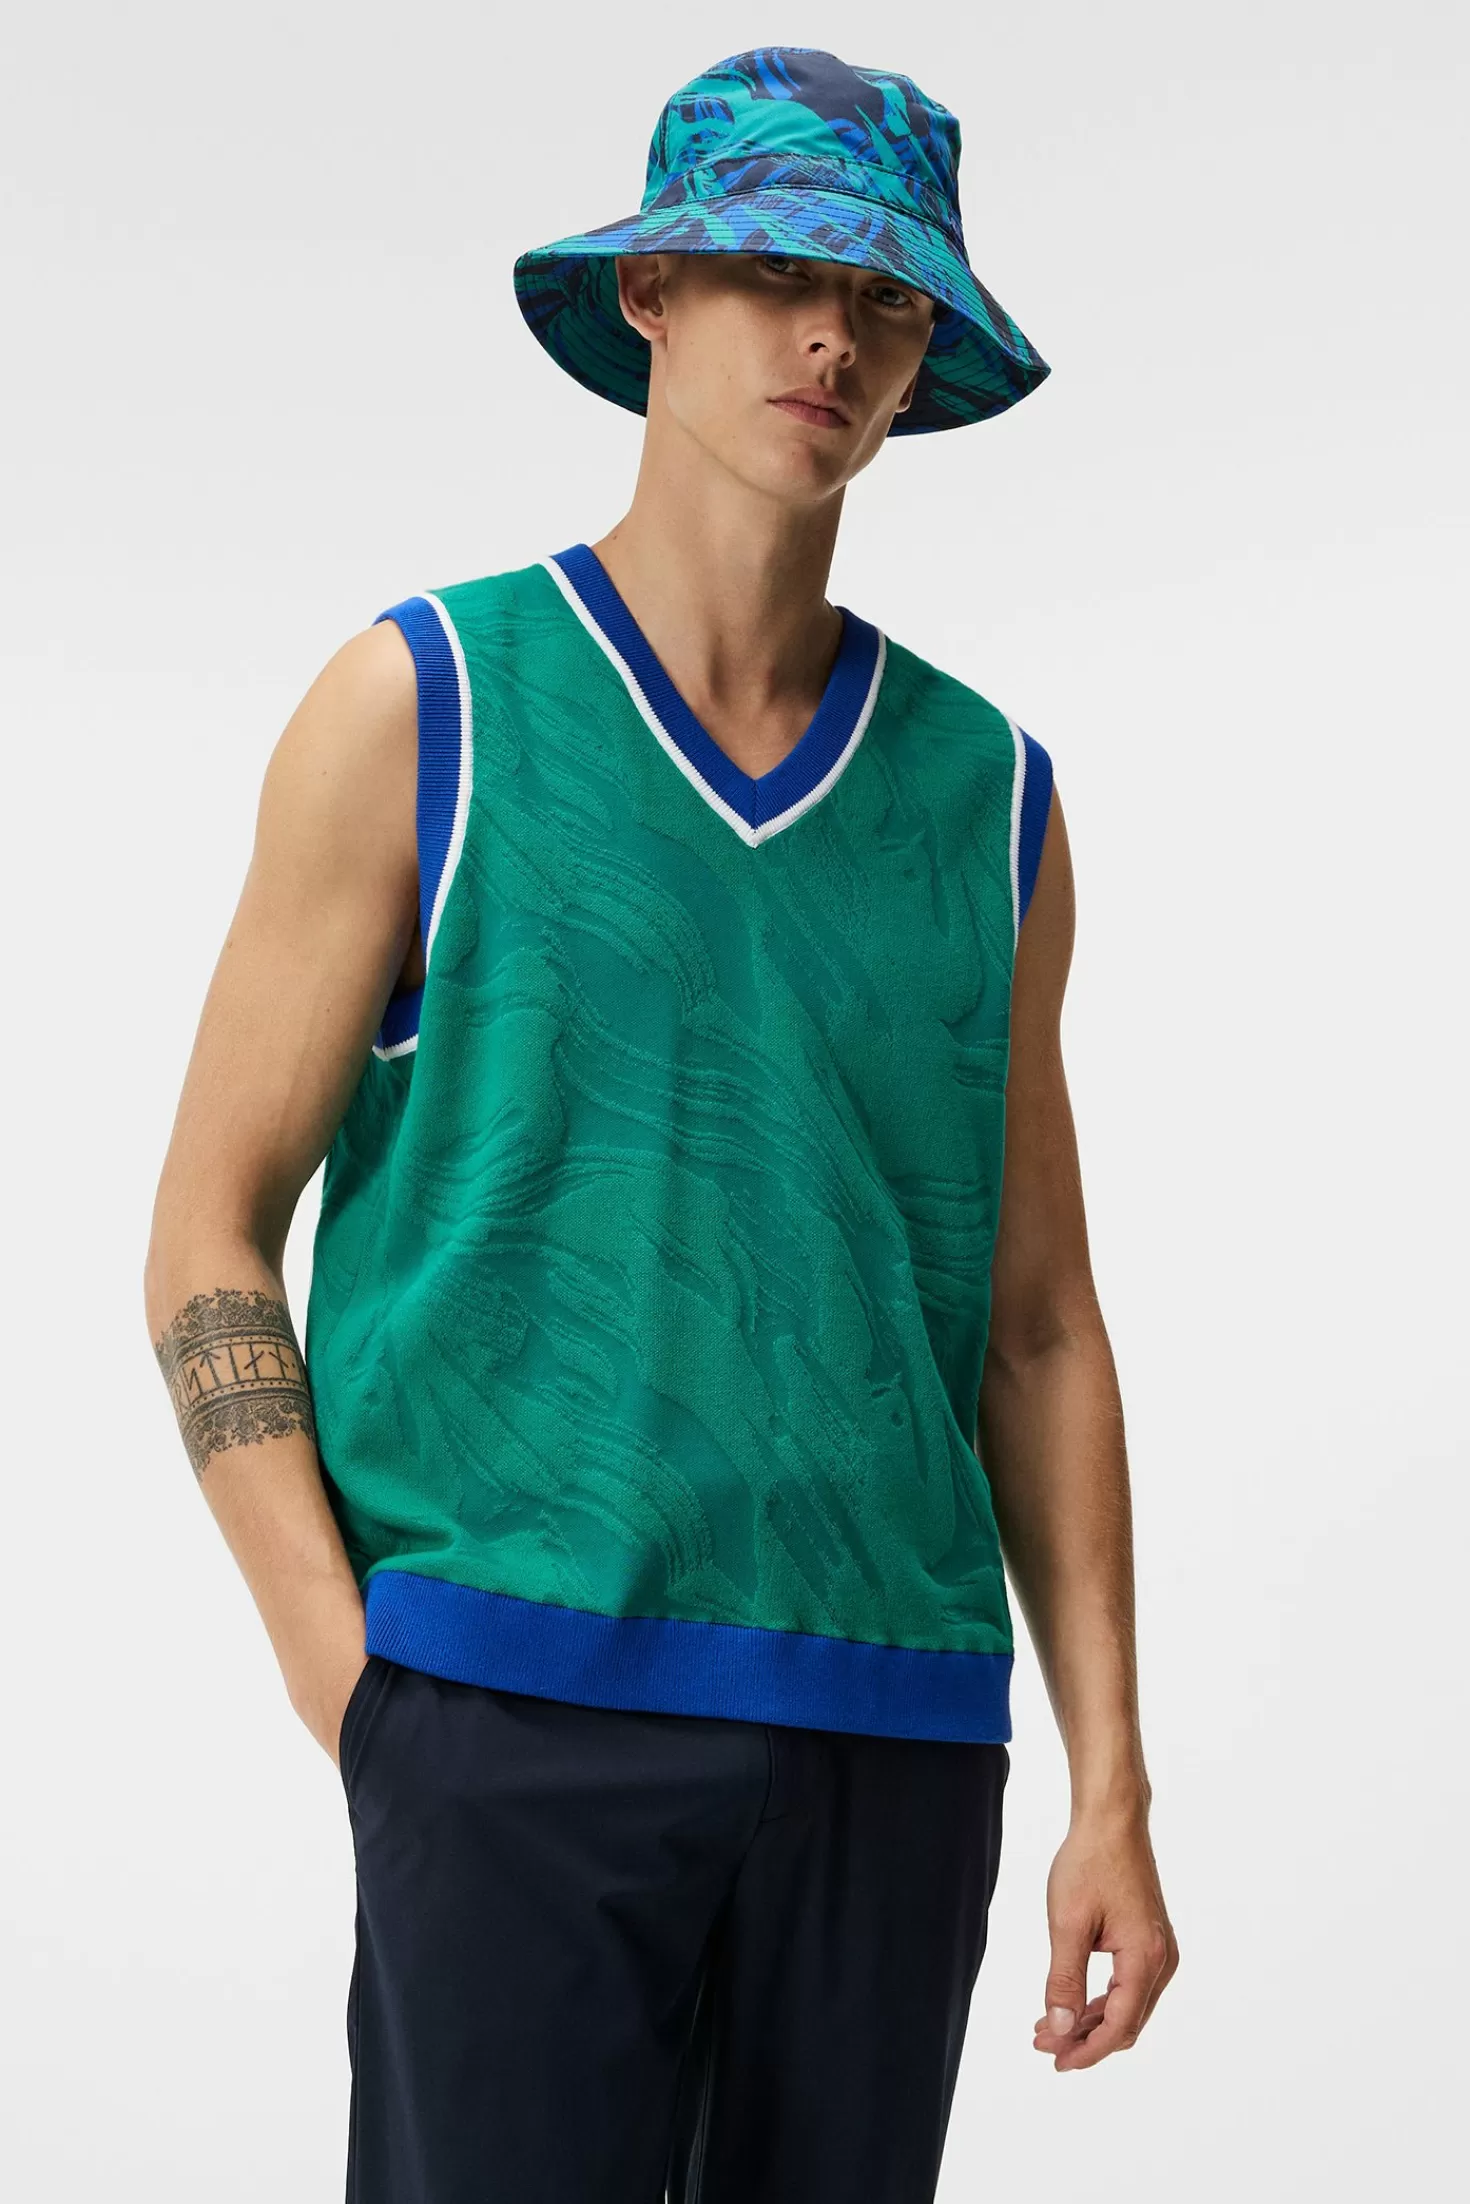 Stickat<J.Lindeberg Finely Knitted Vest Proud Peacock